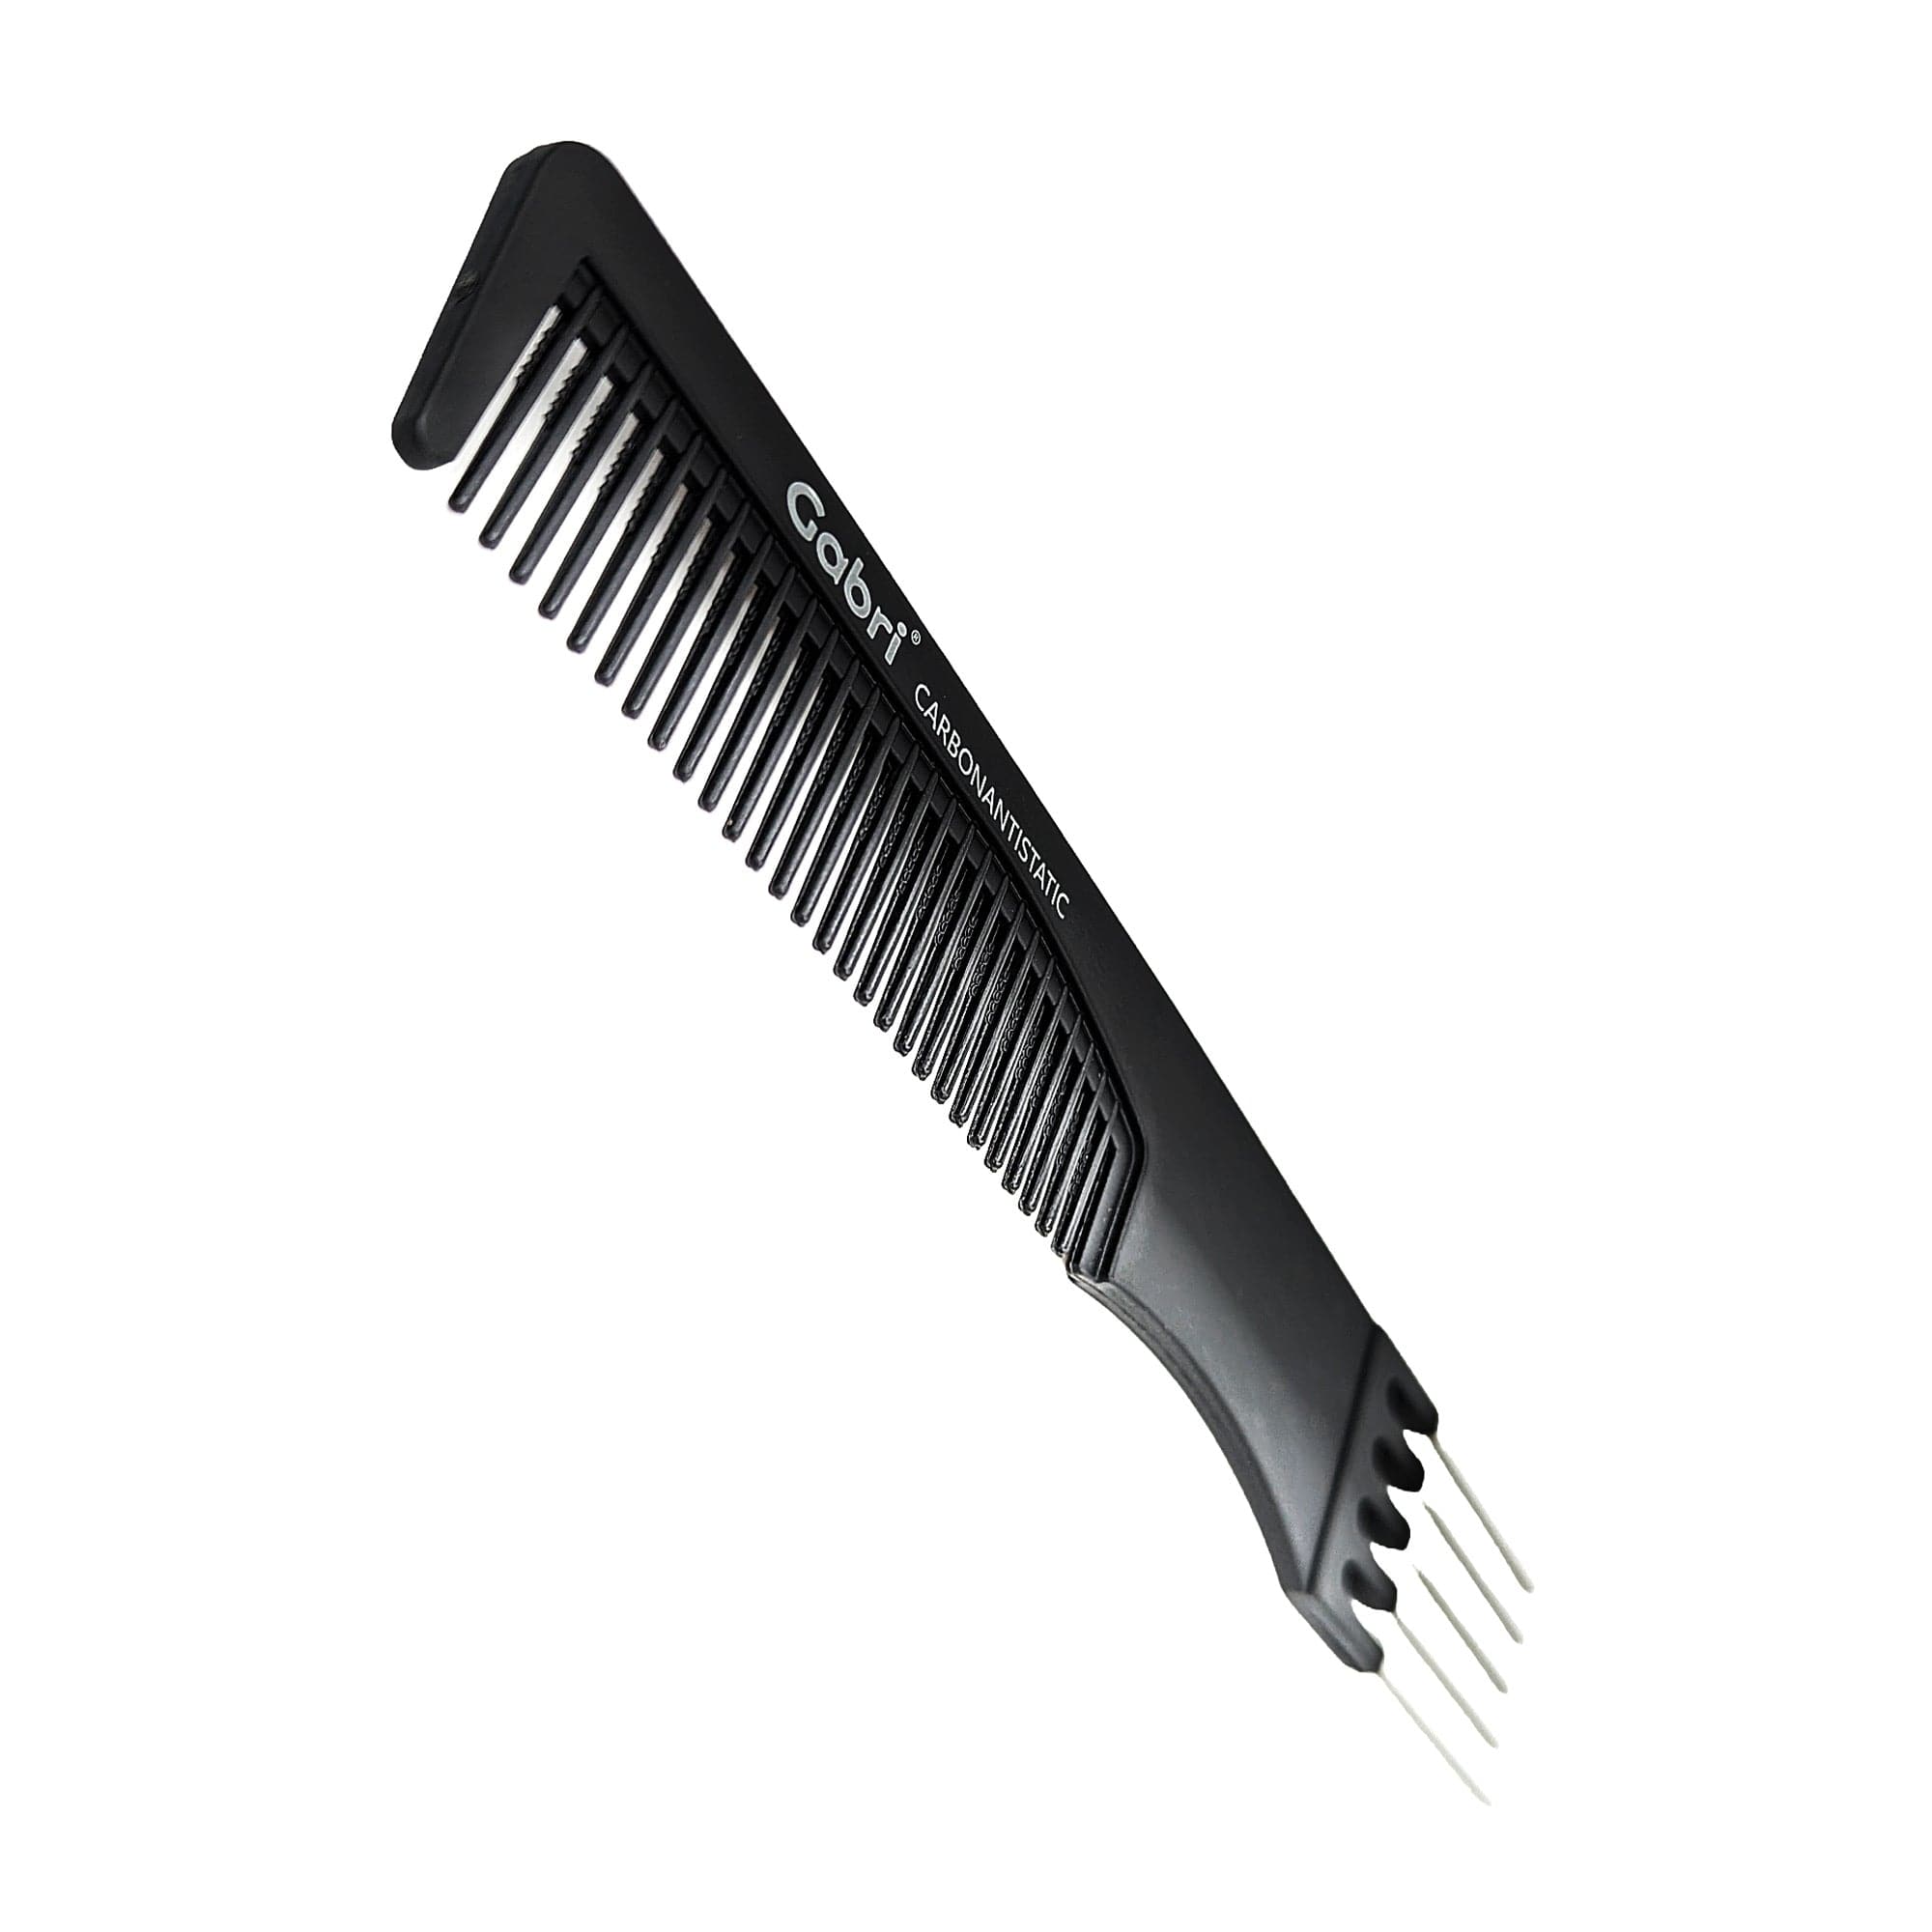 Gabri - Hair Styling Comb 2in1 Sided Comb & Pin Lift No.26 19cm